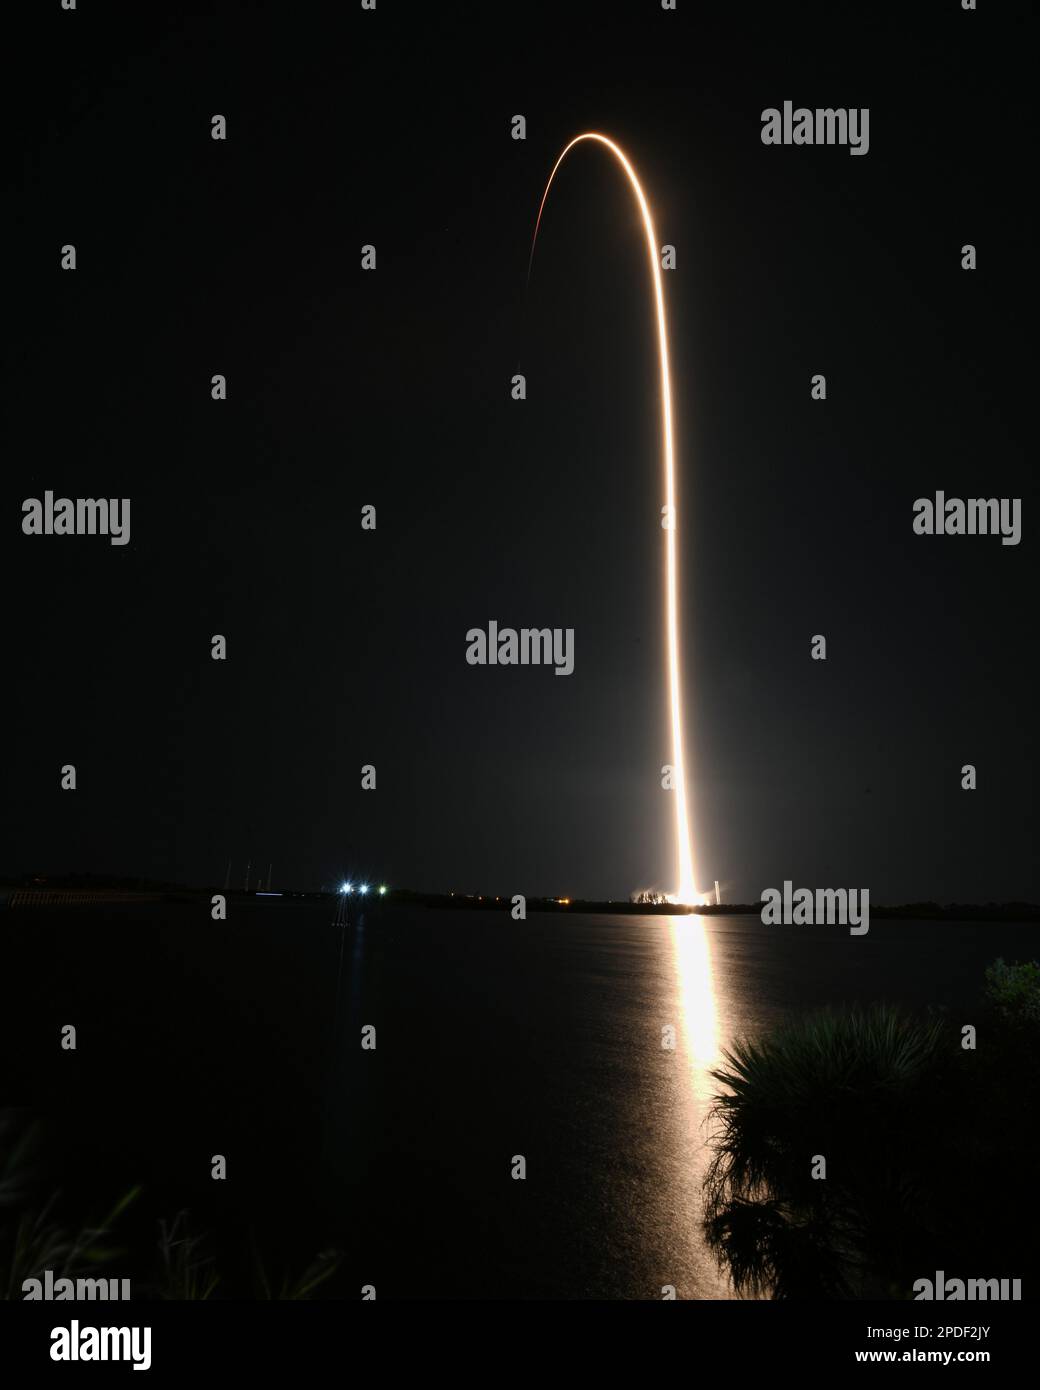 Florida, US, March 14, 2023. Timed exposure of a SpaceX Falcon 9 rocket as it launches a Cargo Dragon-2 spacecraft with nearly 3 tons of equipment for NASA on its 27th resupply mission at 8:30 PM from Complex 39A at the Kennedy Space Center, Florida on Tuesday, March 14, 2023. Cargo Dragon is carrying equipment and supplies to the International Space Station. Photo by Joe Marino/UPI Credit: UPI/Alamy Live News Stock Photo